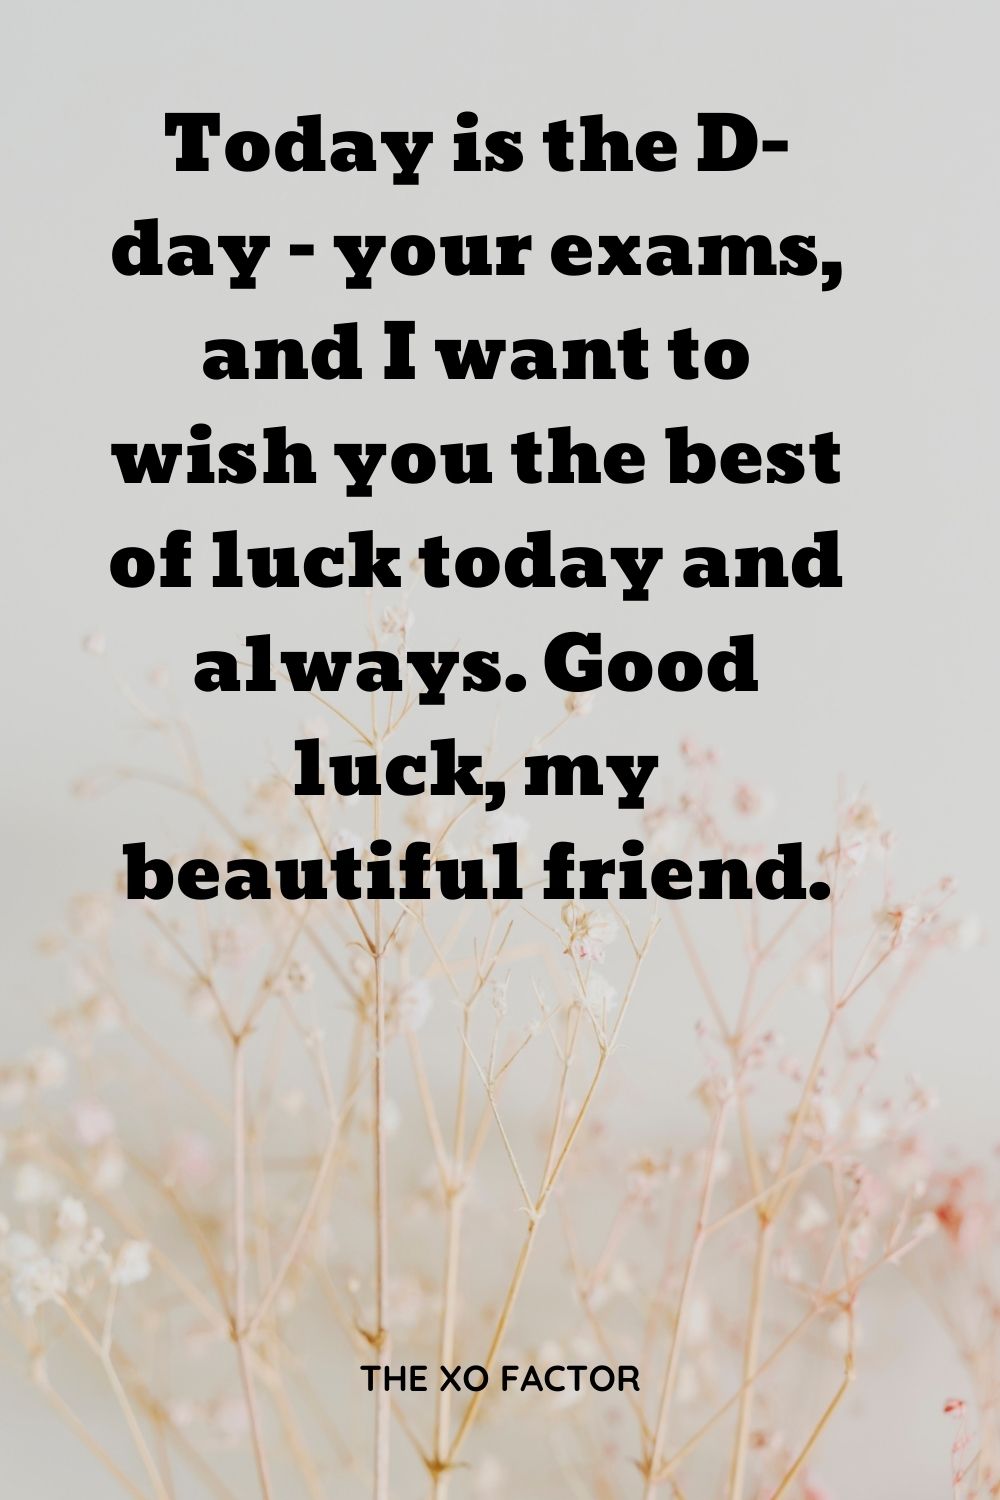 Today is the D-day – your exams, and I want to wish you the best of luck today and always. Good luck, my beautiful friend.